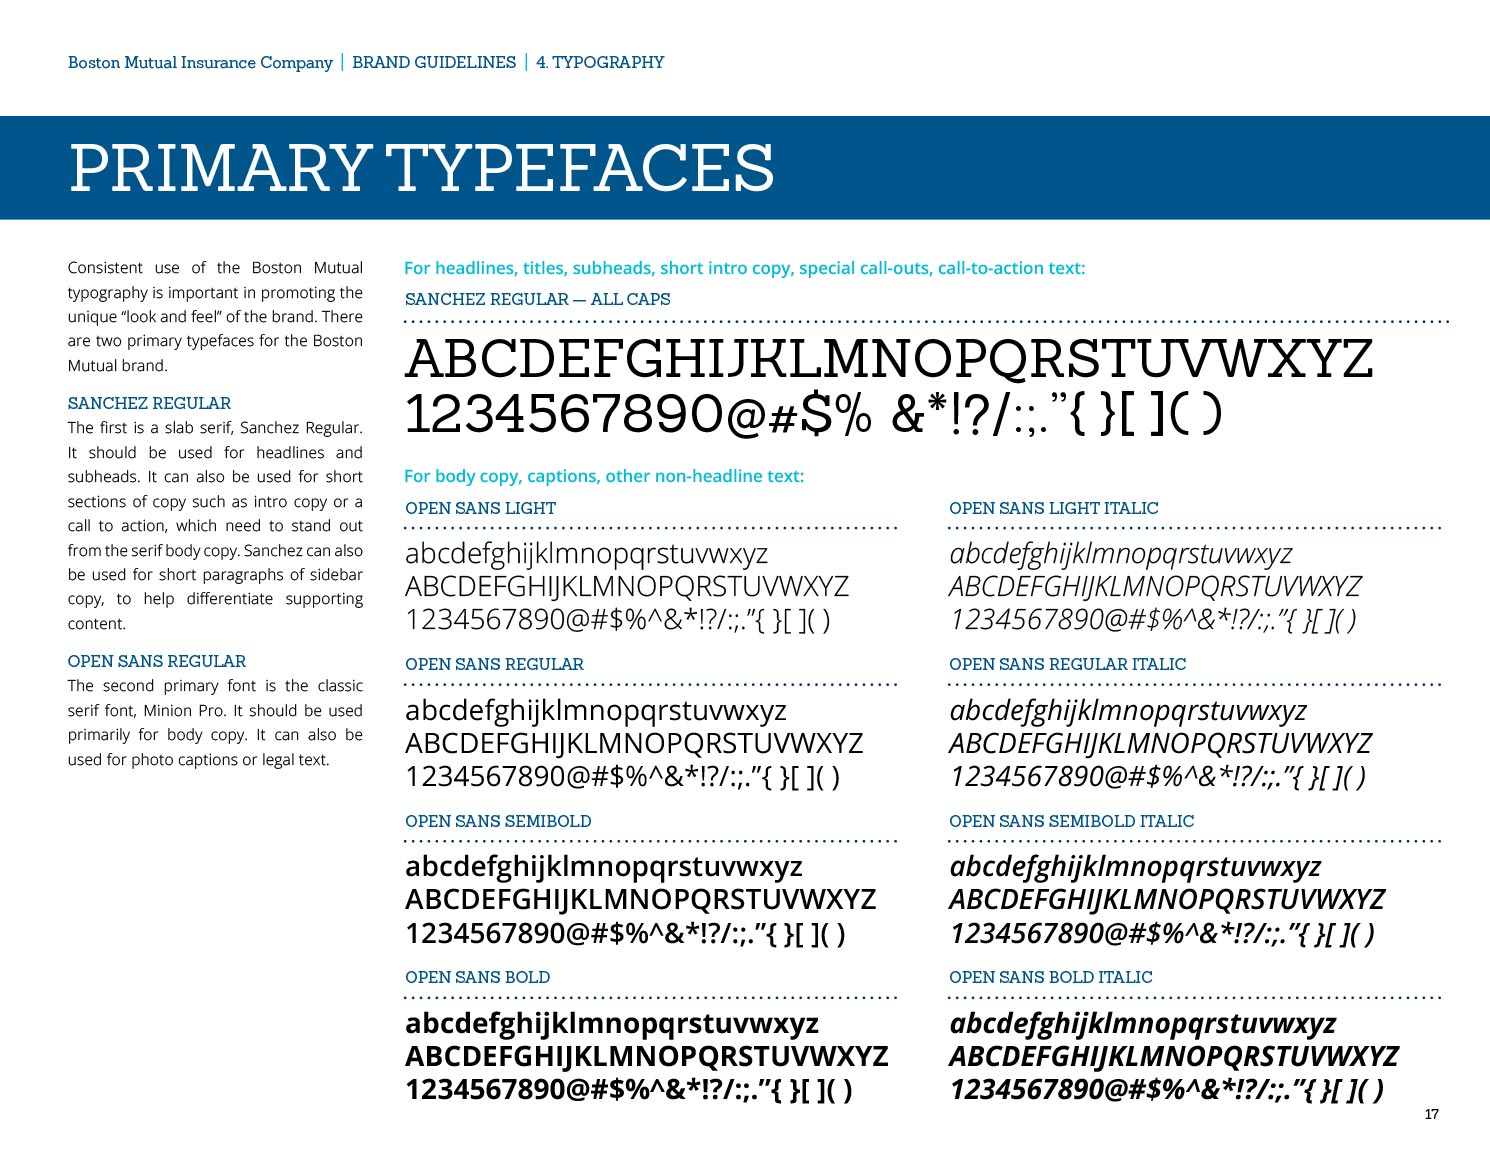 boston mutual brand guide page showing primary typefaces